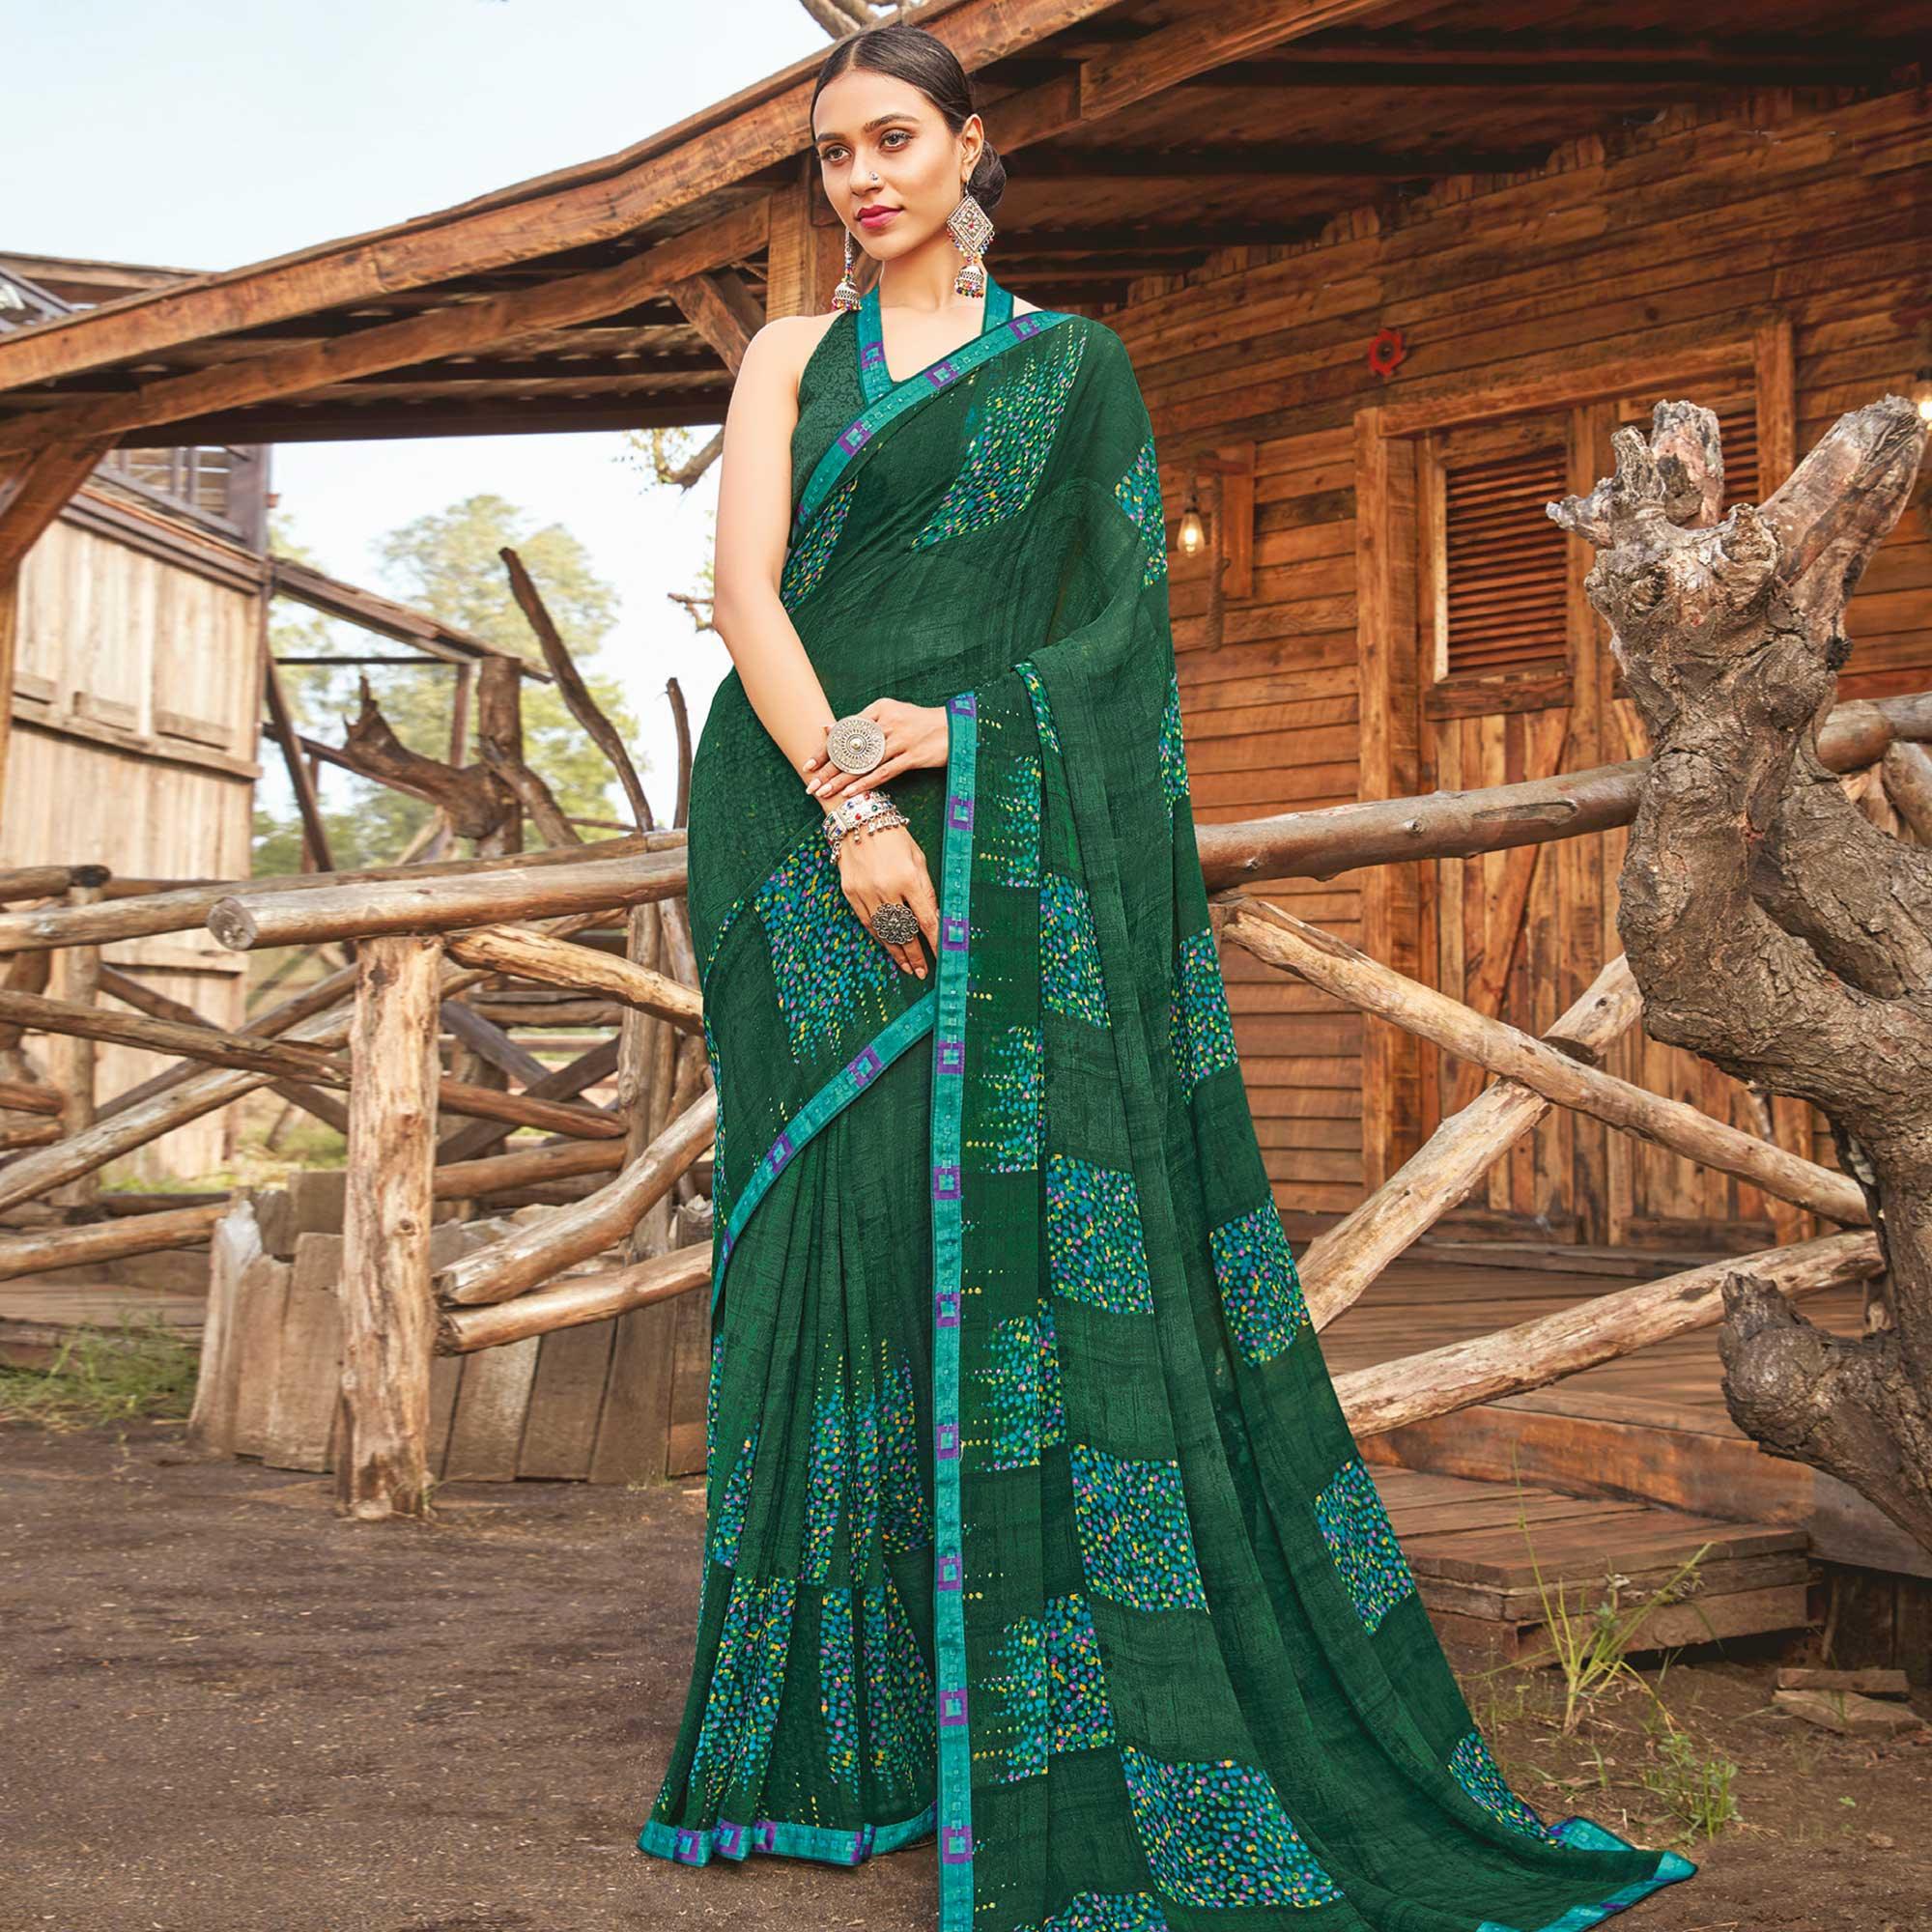 Ravishing Dark Green Coloured Partywear Pure Georgette Floral Printed Saree With Fancy Lace Border - Peachmode